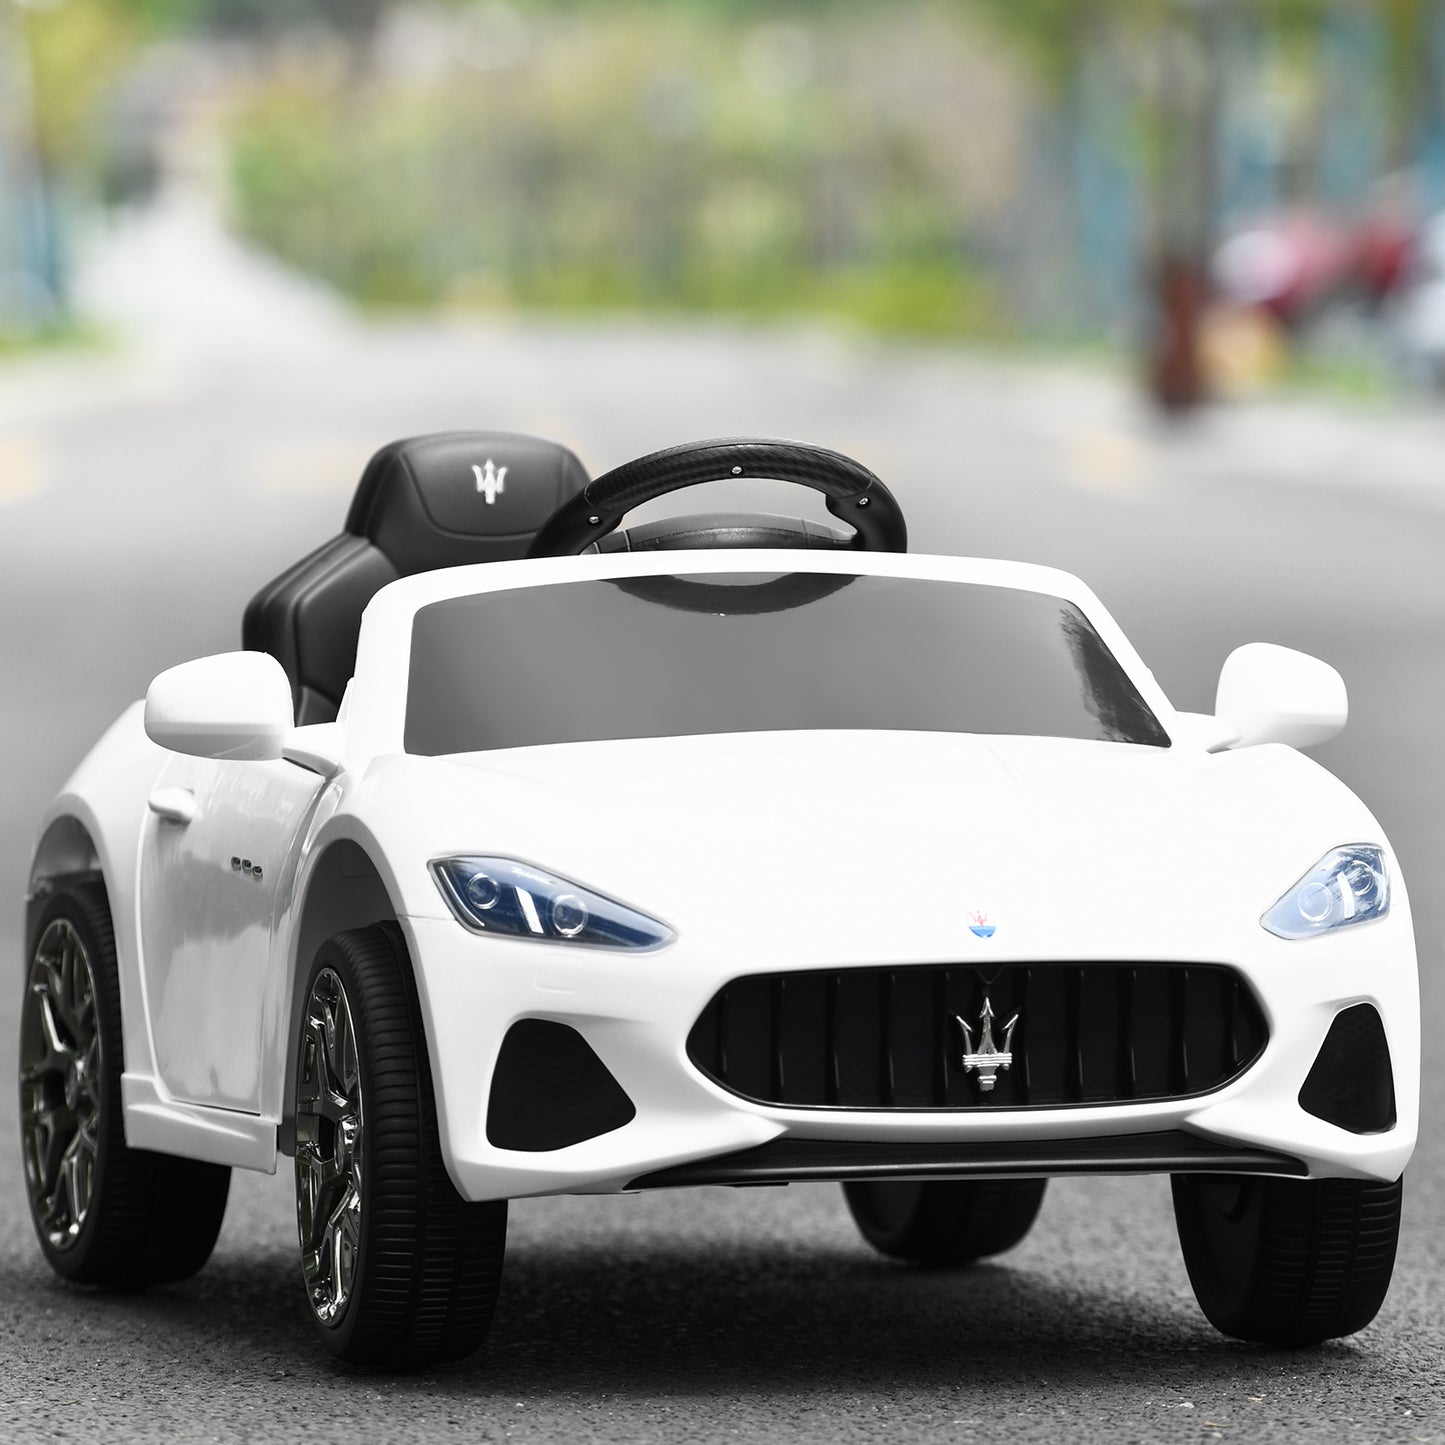 Powerful Kids Electric Ride On Toy Sports Car 12V